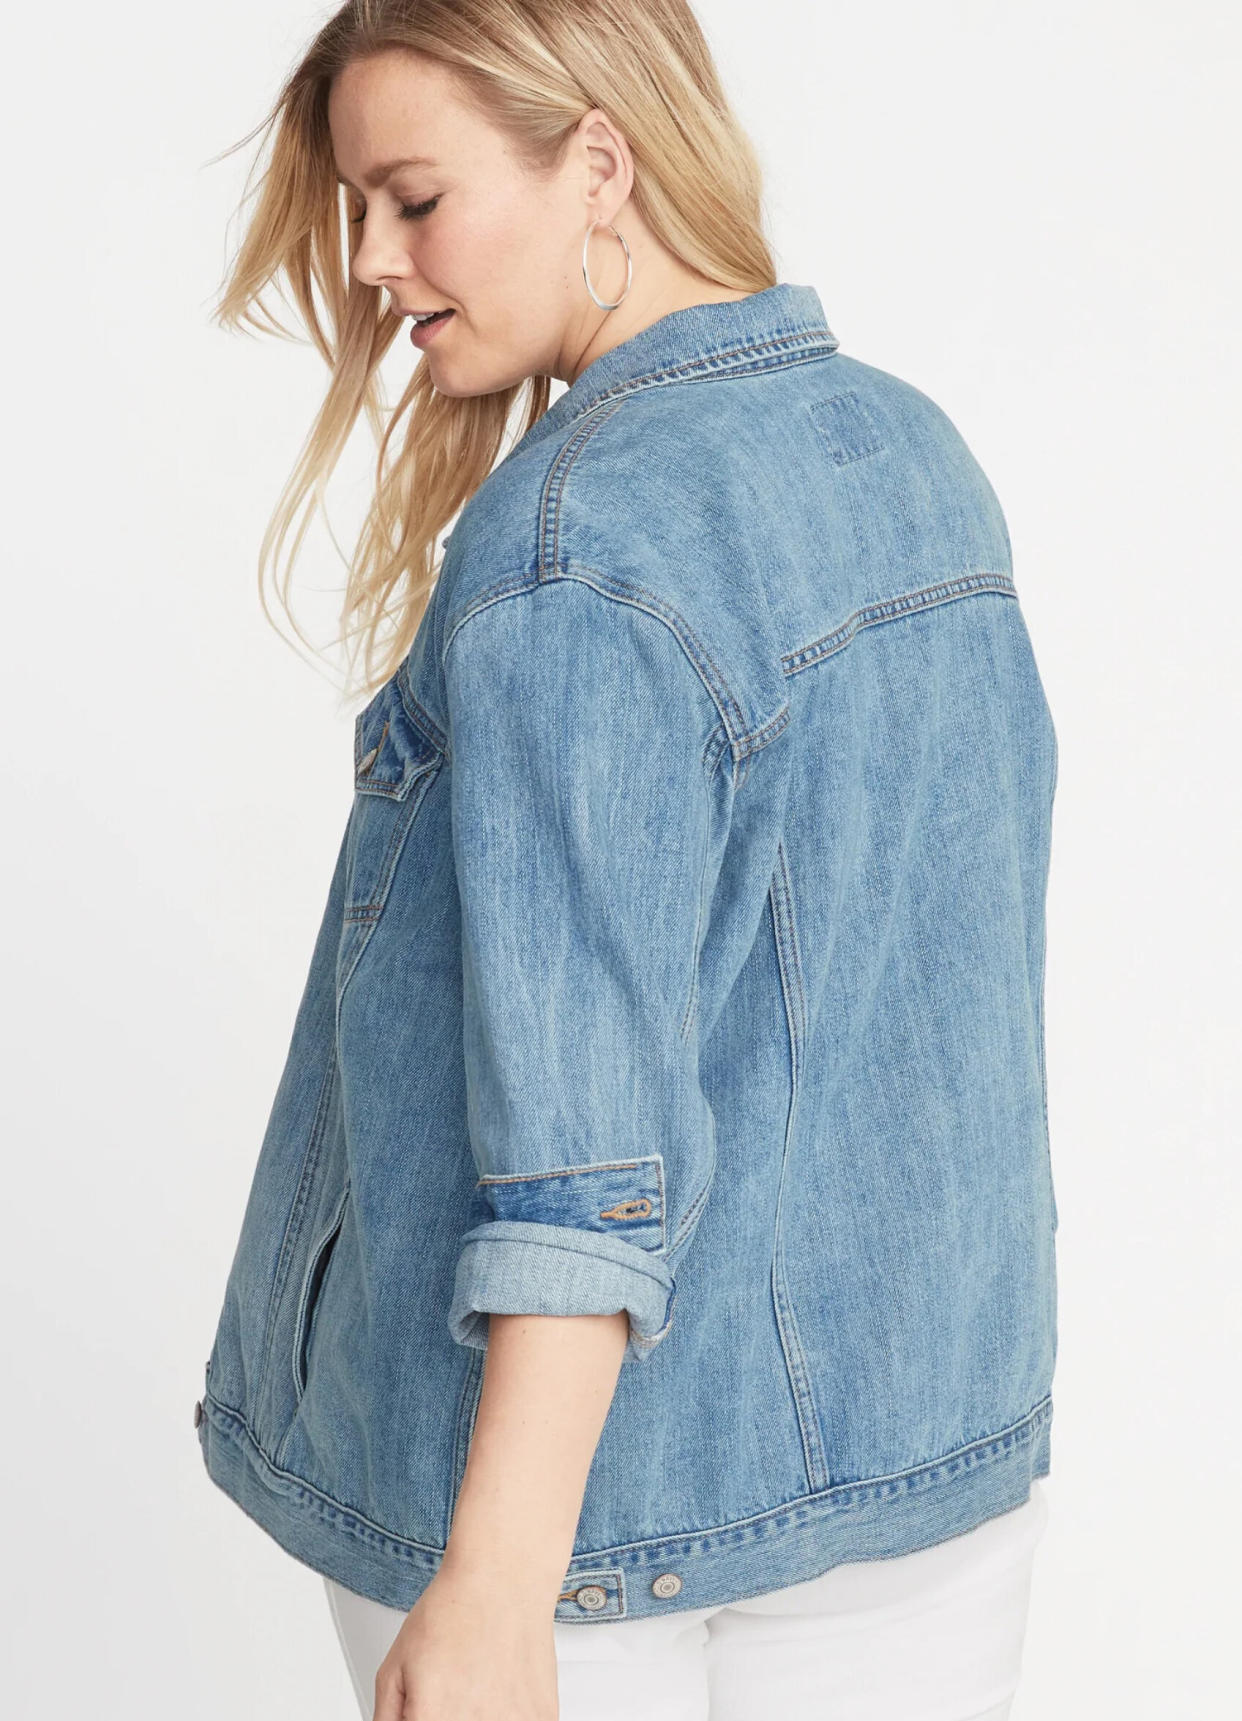 Old Navy's best-selling denim jacket is perfect for summer and under $50. (Photo: Old Navy)